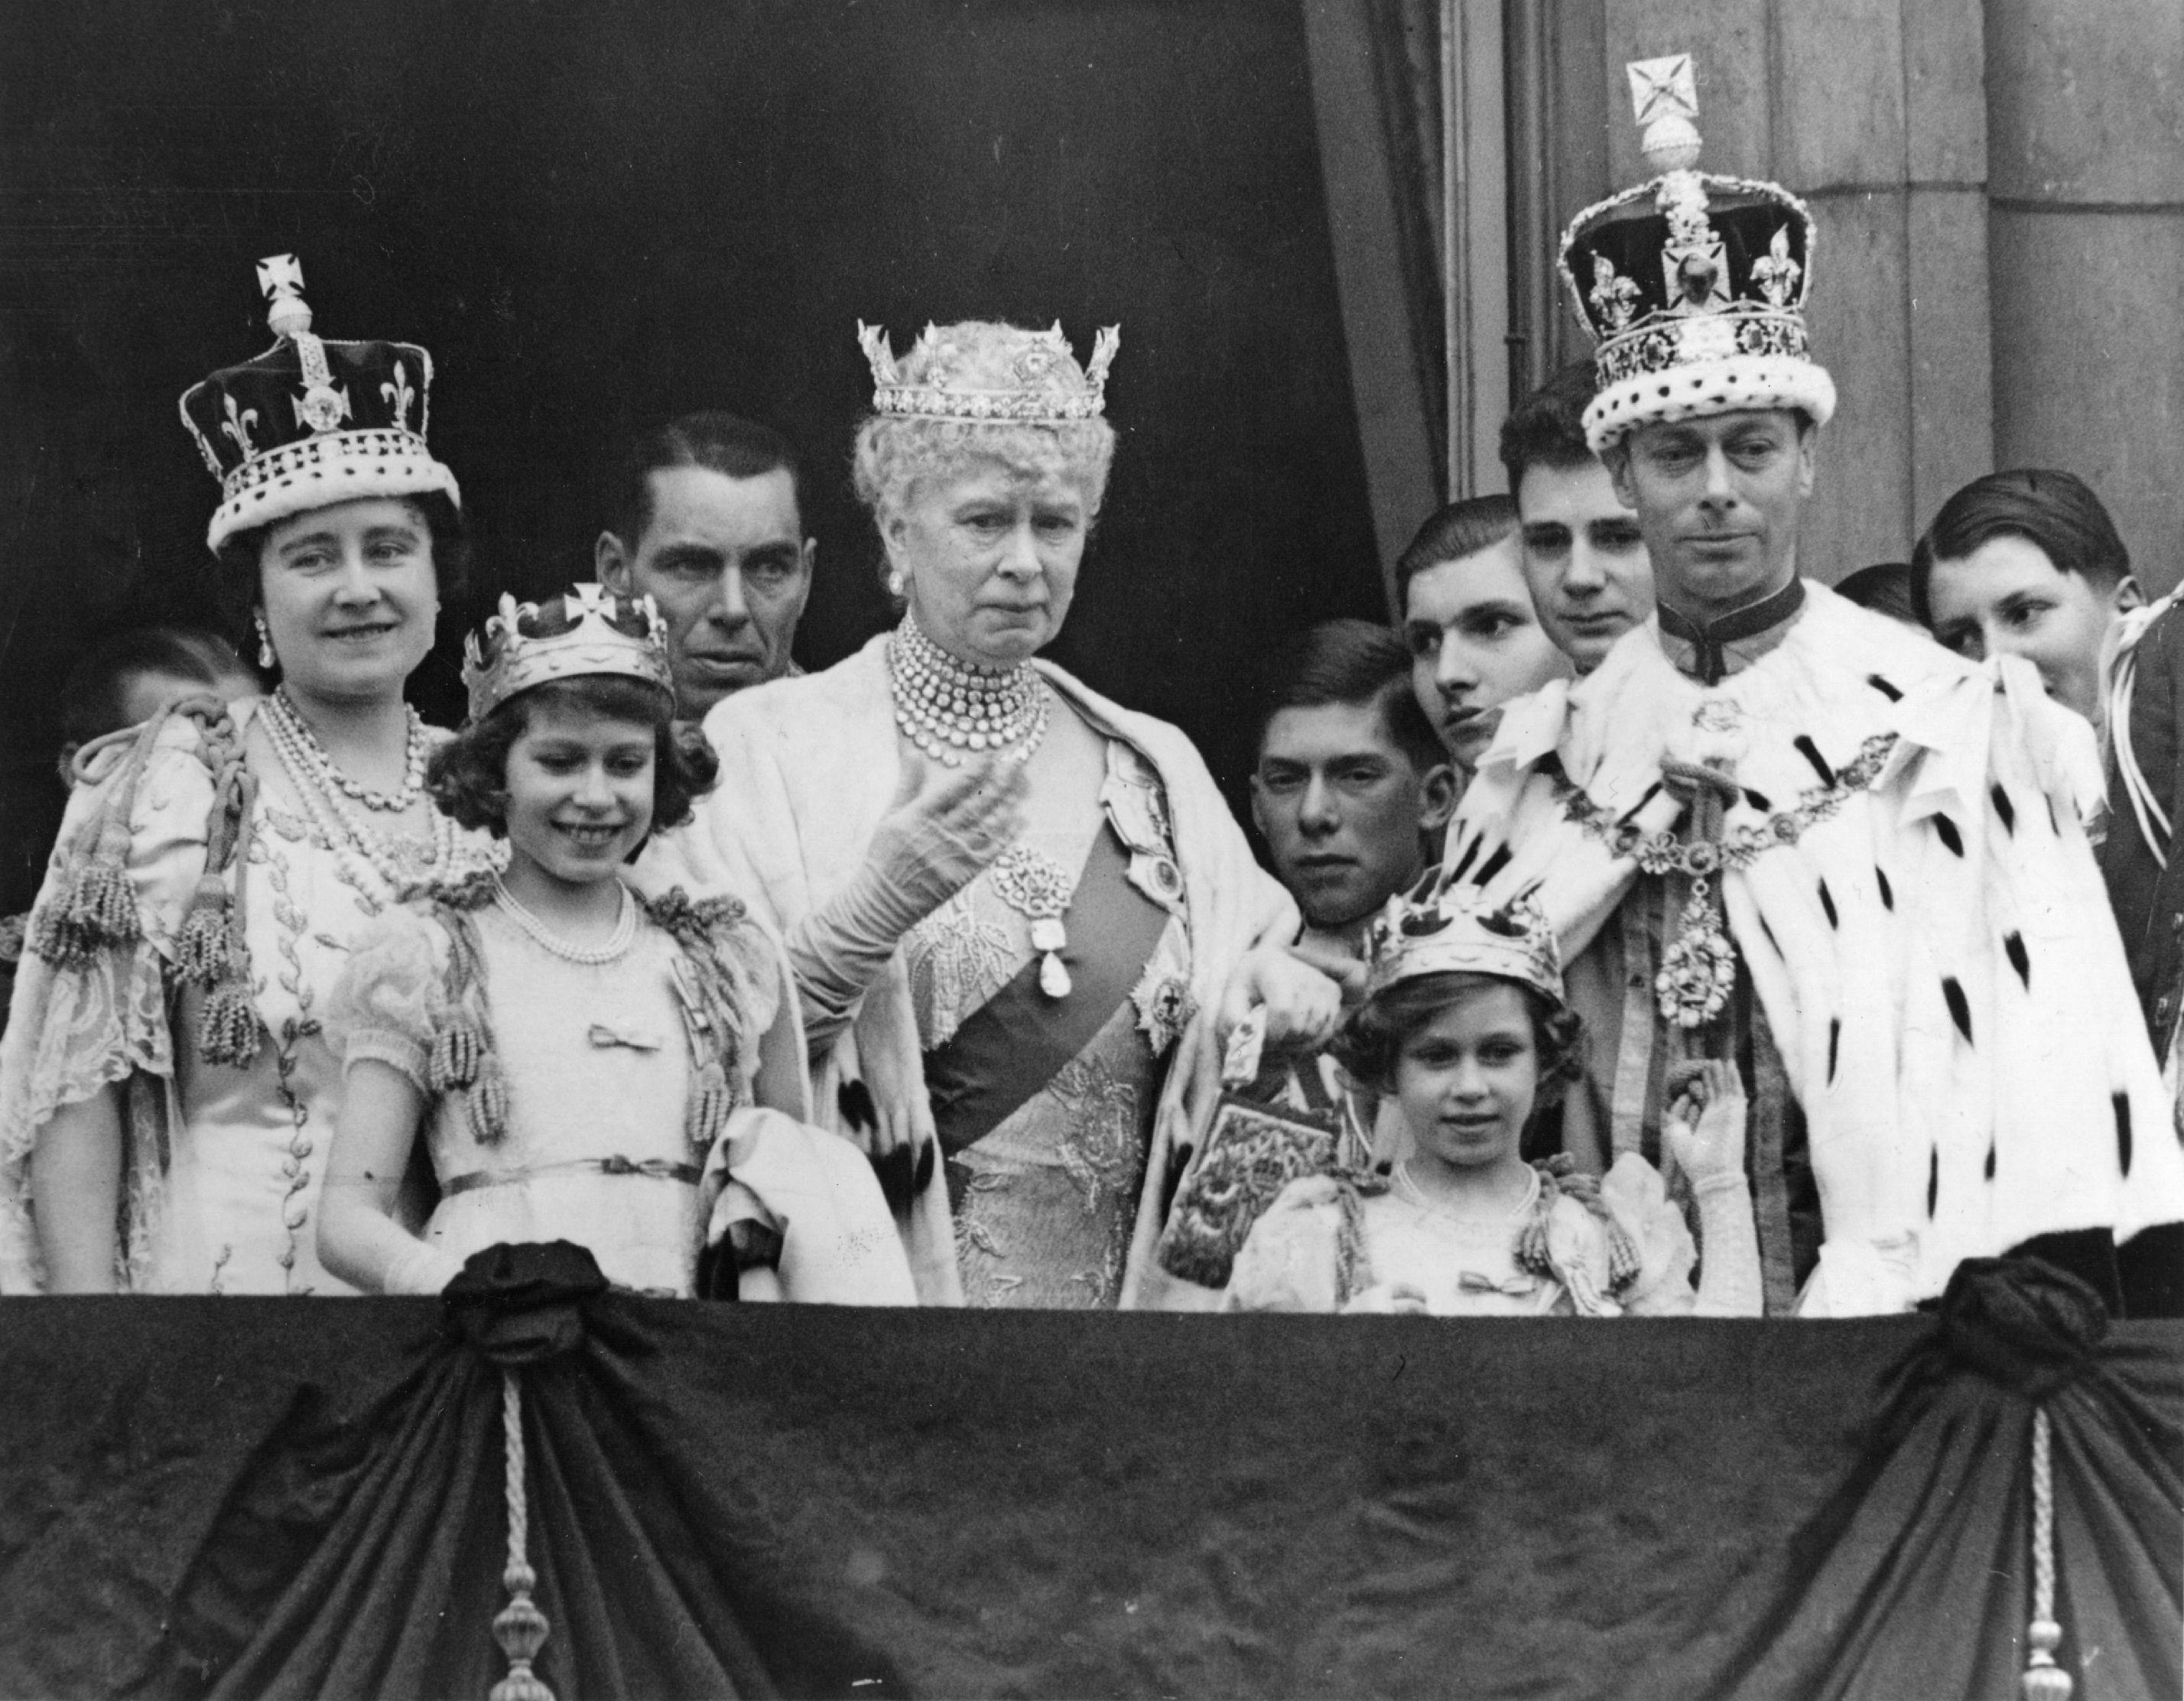 <p>King George VI and wife Queen Elizabeth appeared on the balcony at Buckingham Palace with his mother, Queen Mary, and daughters Princess Elizabeth (later Queen Elizabeth II) and Princess Margaret as well as other members of the extended royal family after the king's coronation ceremony on May 12, 1937.</p><p>MORE: <a href="https://www.wonderwall.com/celebrity/royals/best-photos-from-queen-elizabeth-ii-funeral-king-charles-princes-william-prince-harry-george-charlotte-kate-meghan652347.gallery">See the best photos from Queen Elizabeth II's state funeral</a></p>